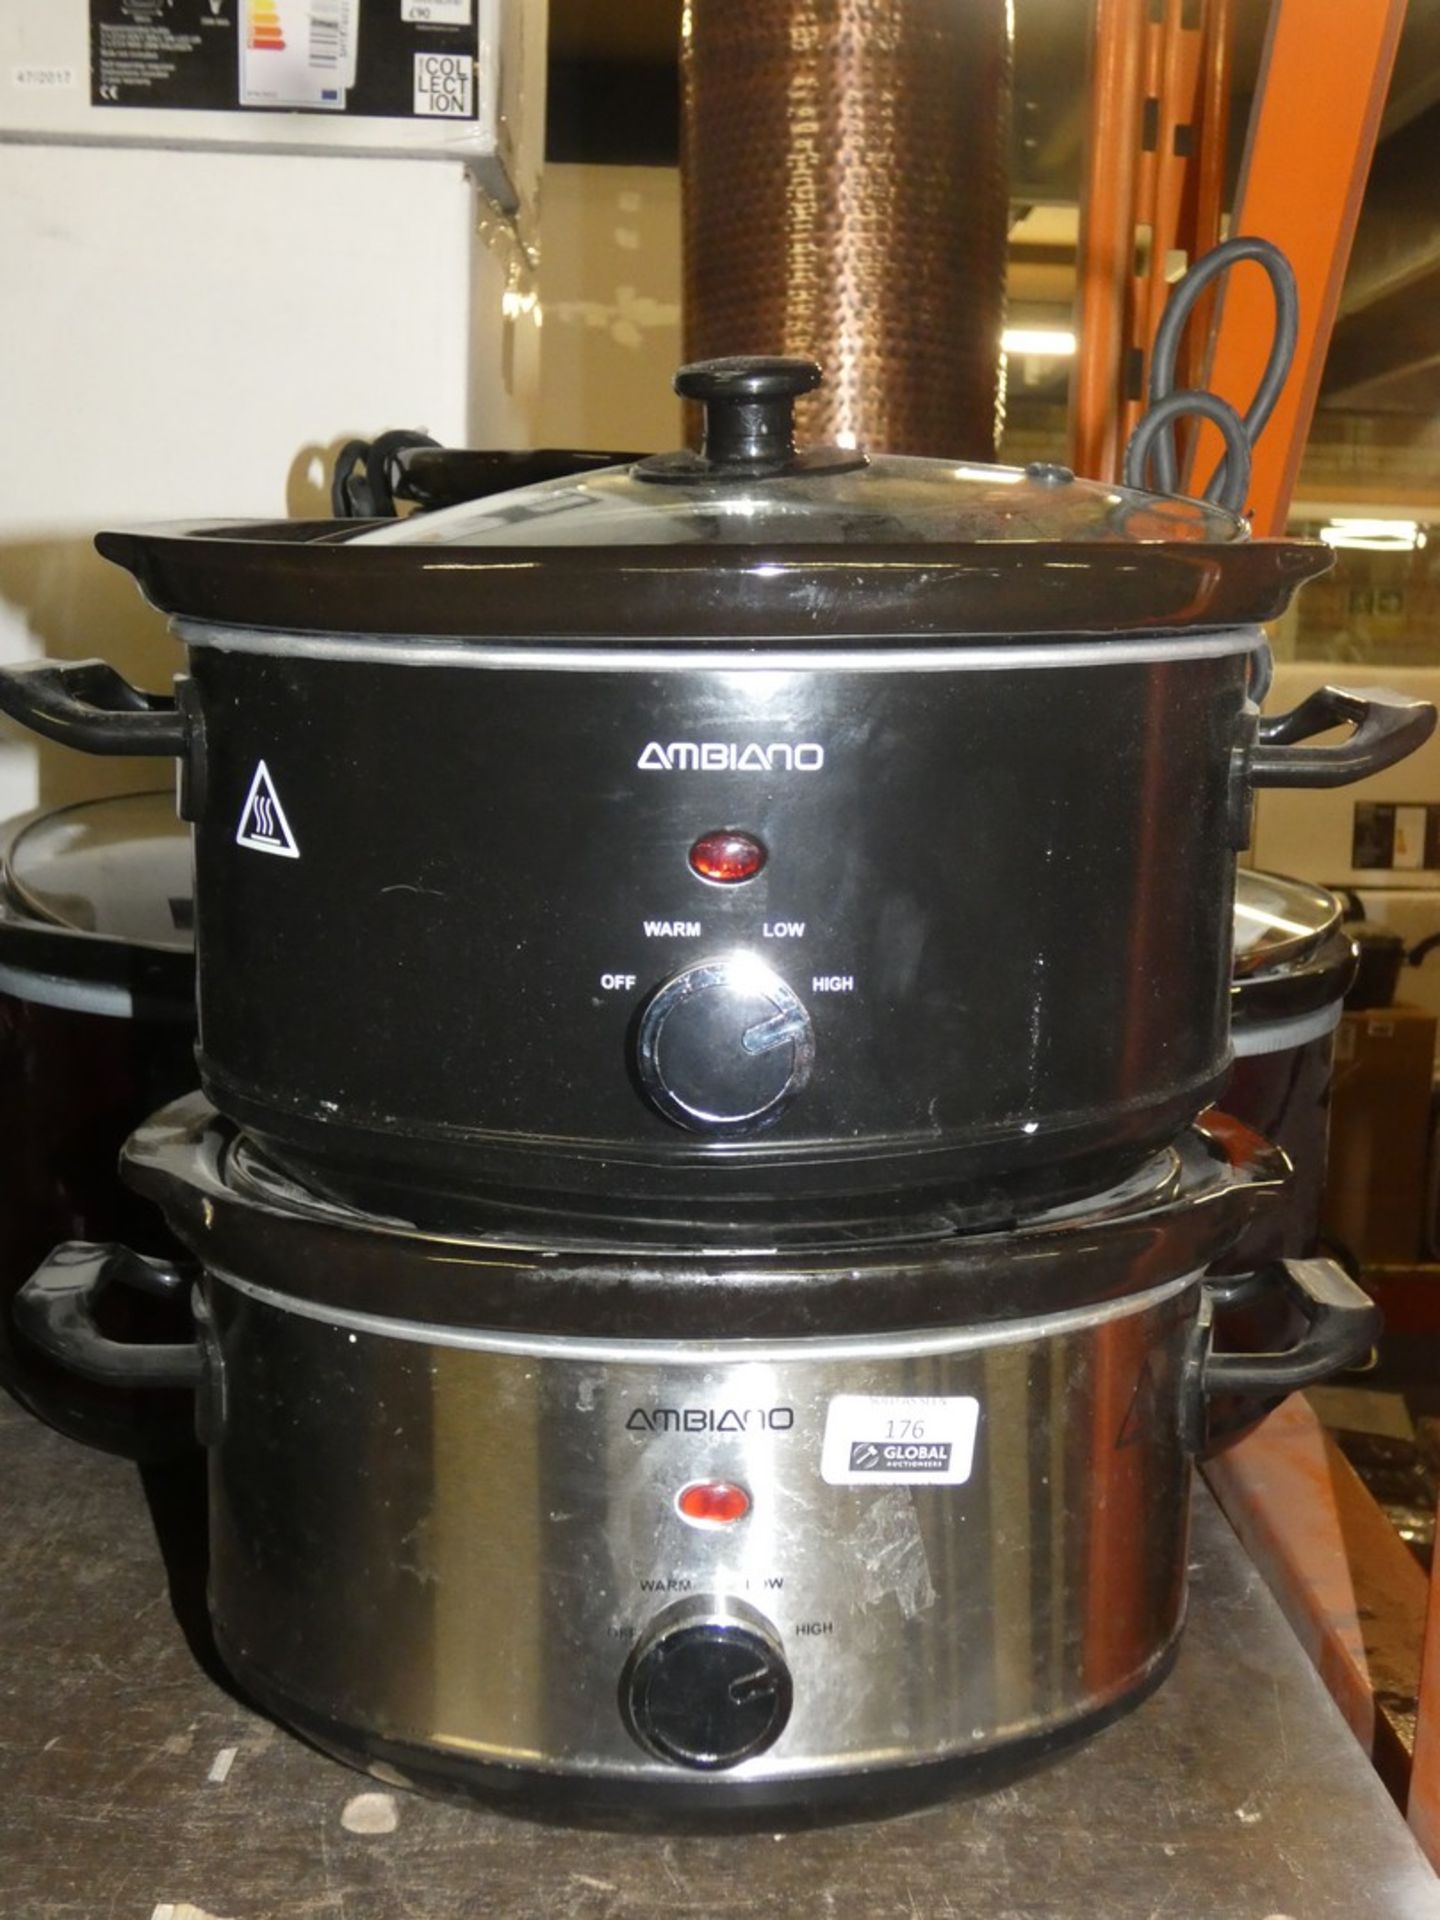 Lot to Contain 5 Ambiano 3.5L Slow Cookers